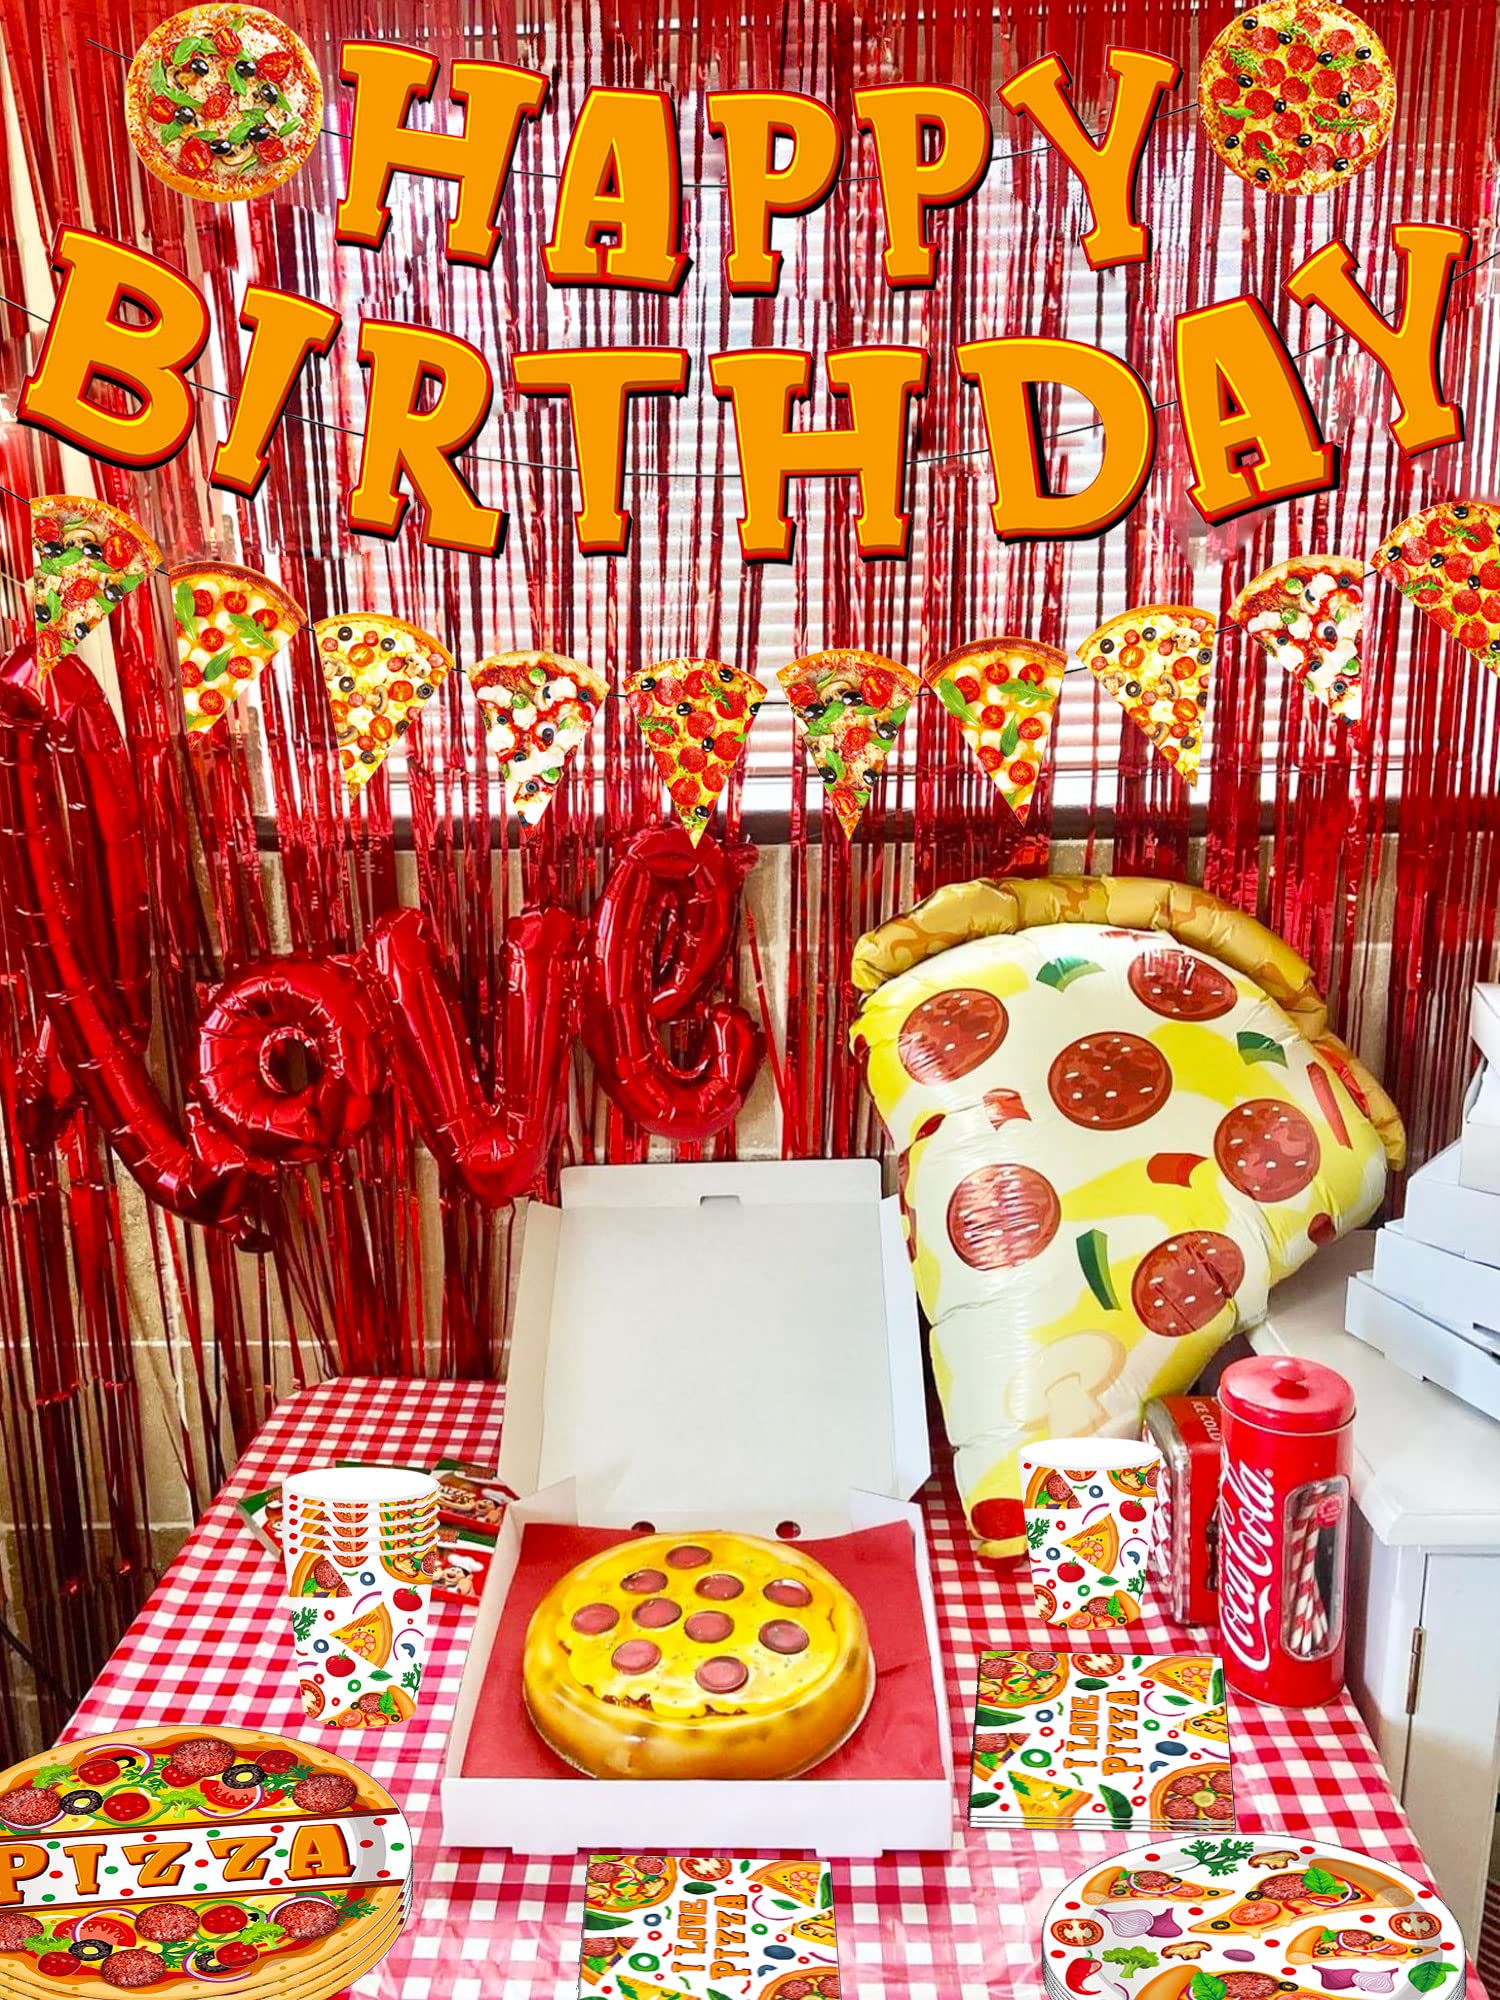 Roaring Good Time 12 PCS Pizza Party Favor Boxes Pizza Goodie Gift Treat Bags Pizza Themed Birthday Party Supplies Pizza Party Decoration Pizza Party Favor Bags